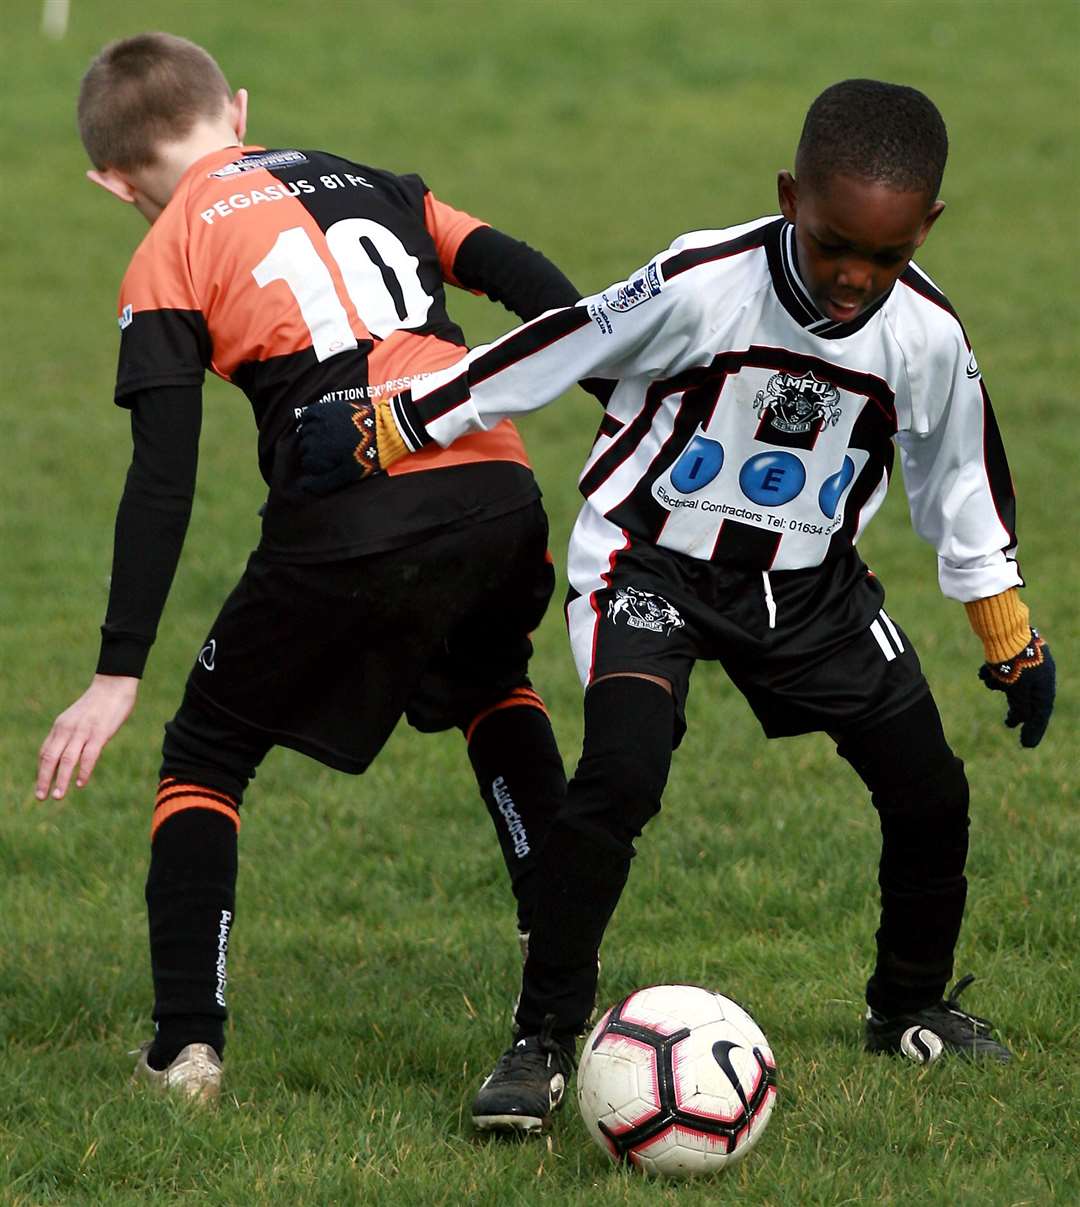 Milton & Fulston under-8s on the ball against Pegasus 81 under-8s. Picture: Phil Lee FM29961655